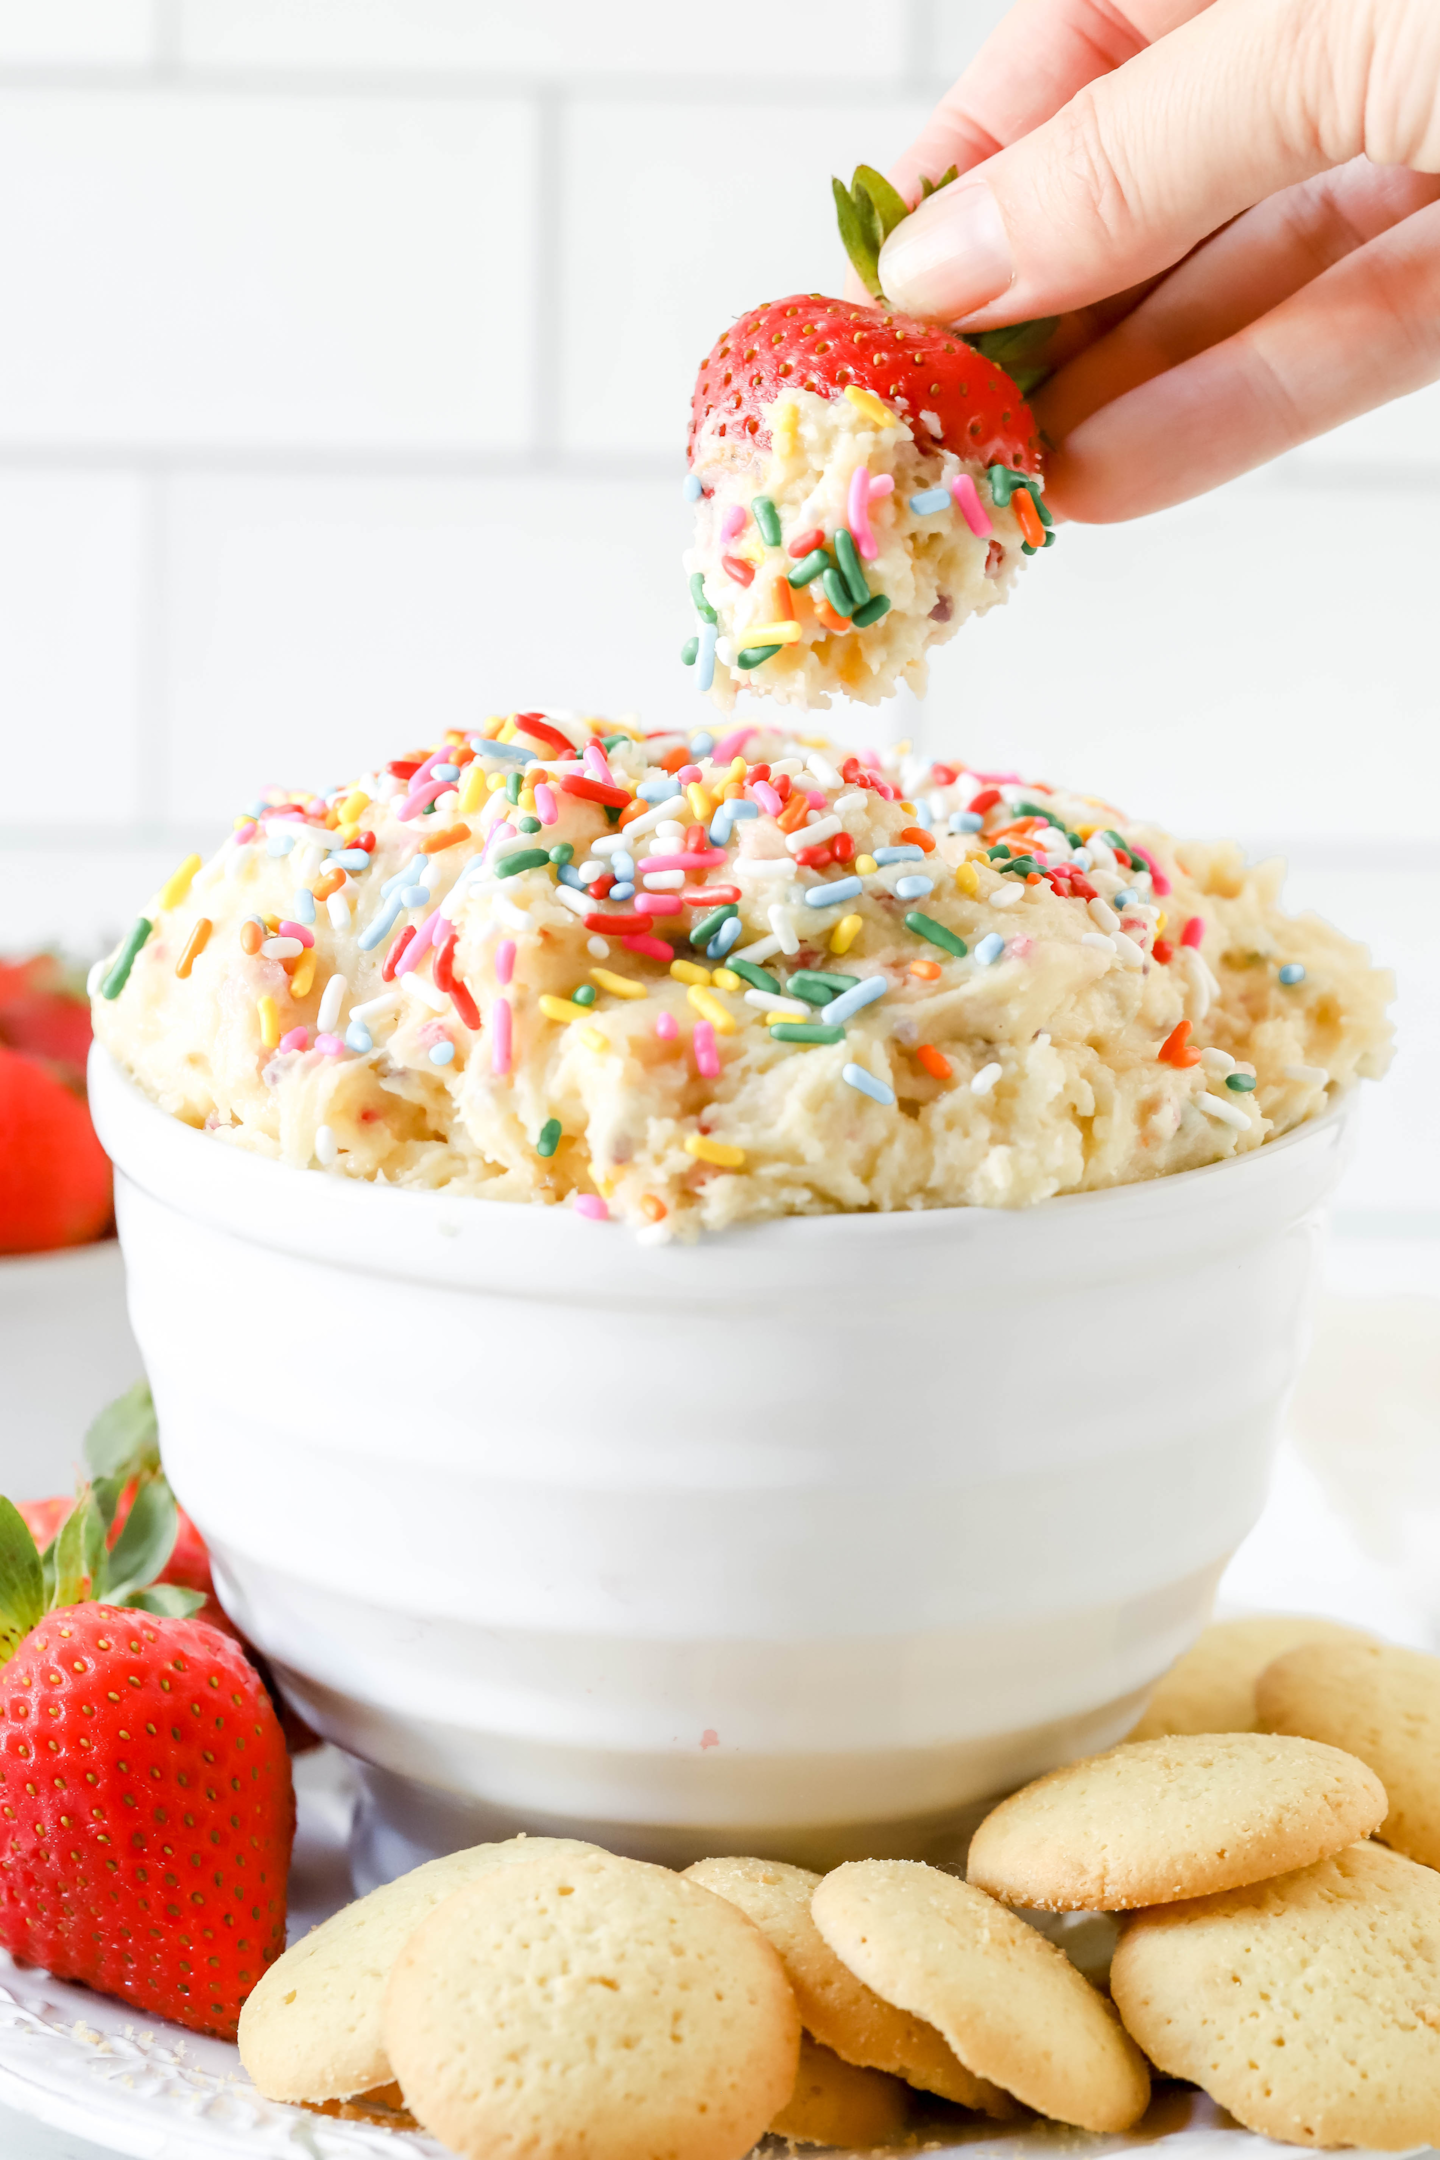 strawberry dipped into cake batter dip